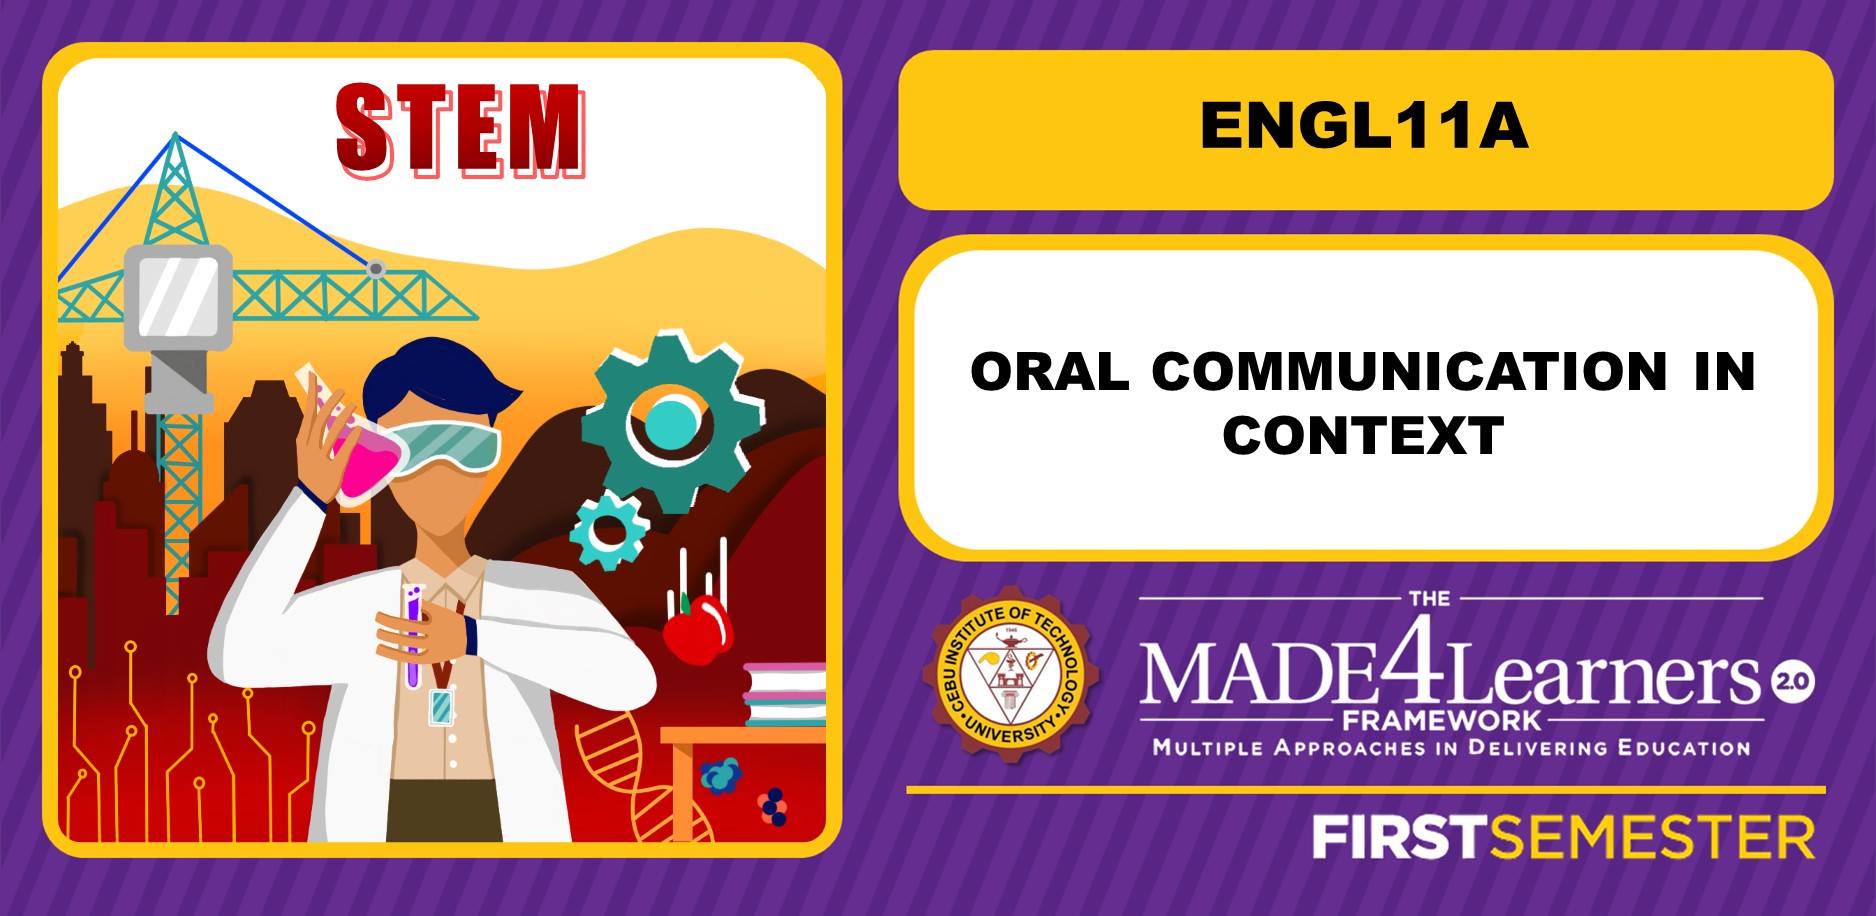 ENGL11A: Oral Communication